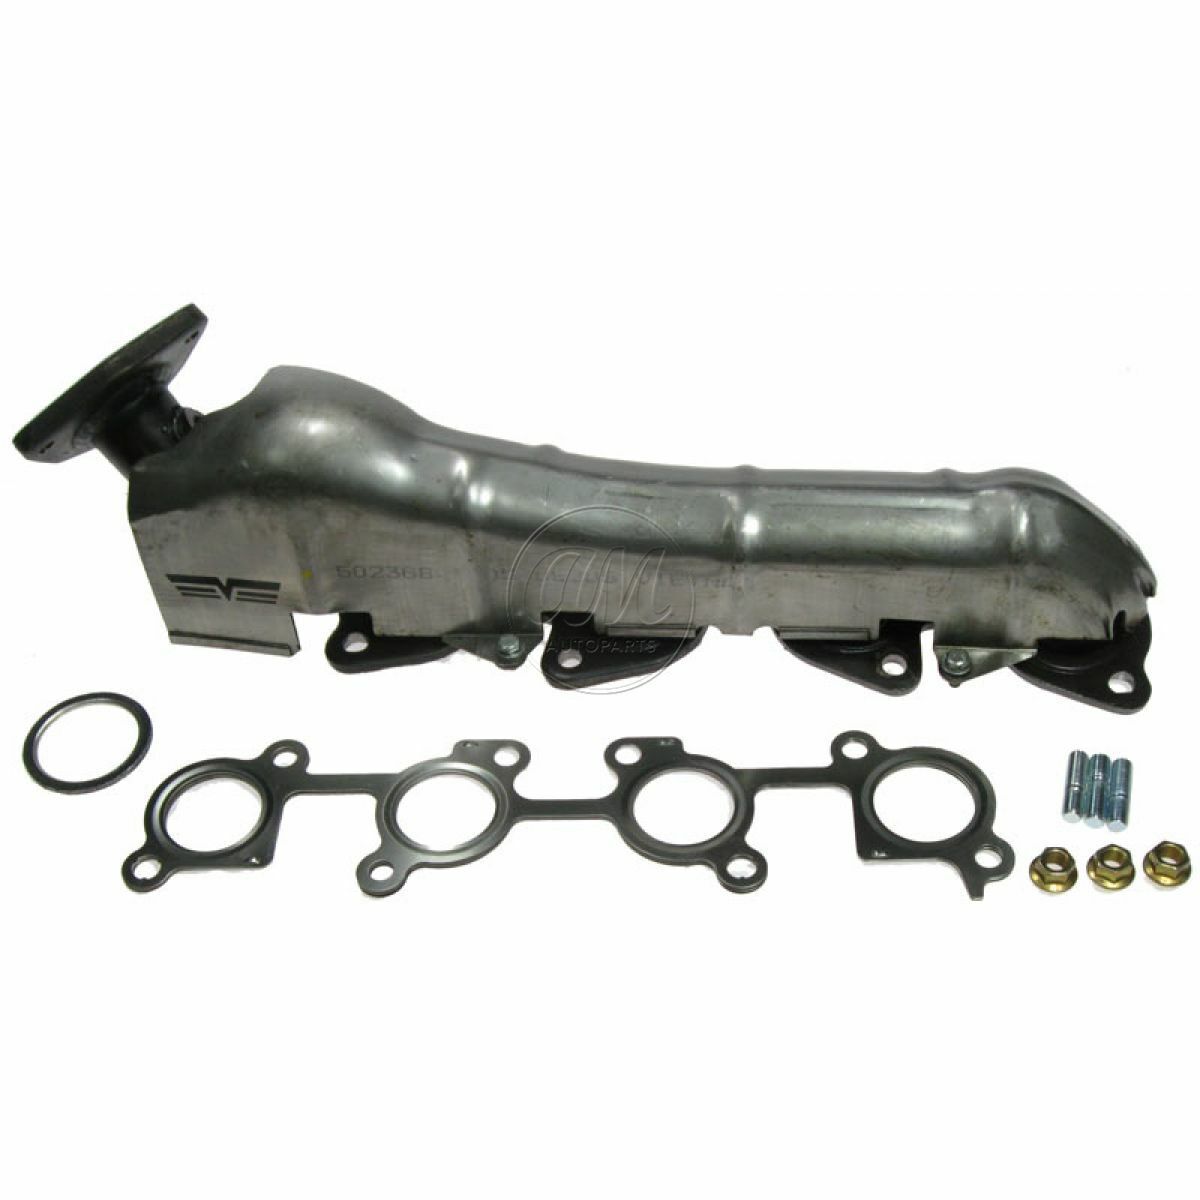 Dorman Exhaust Manifold & Gasket Driver Side Left  for Sequoia Tundra Truck 4.7L